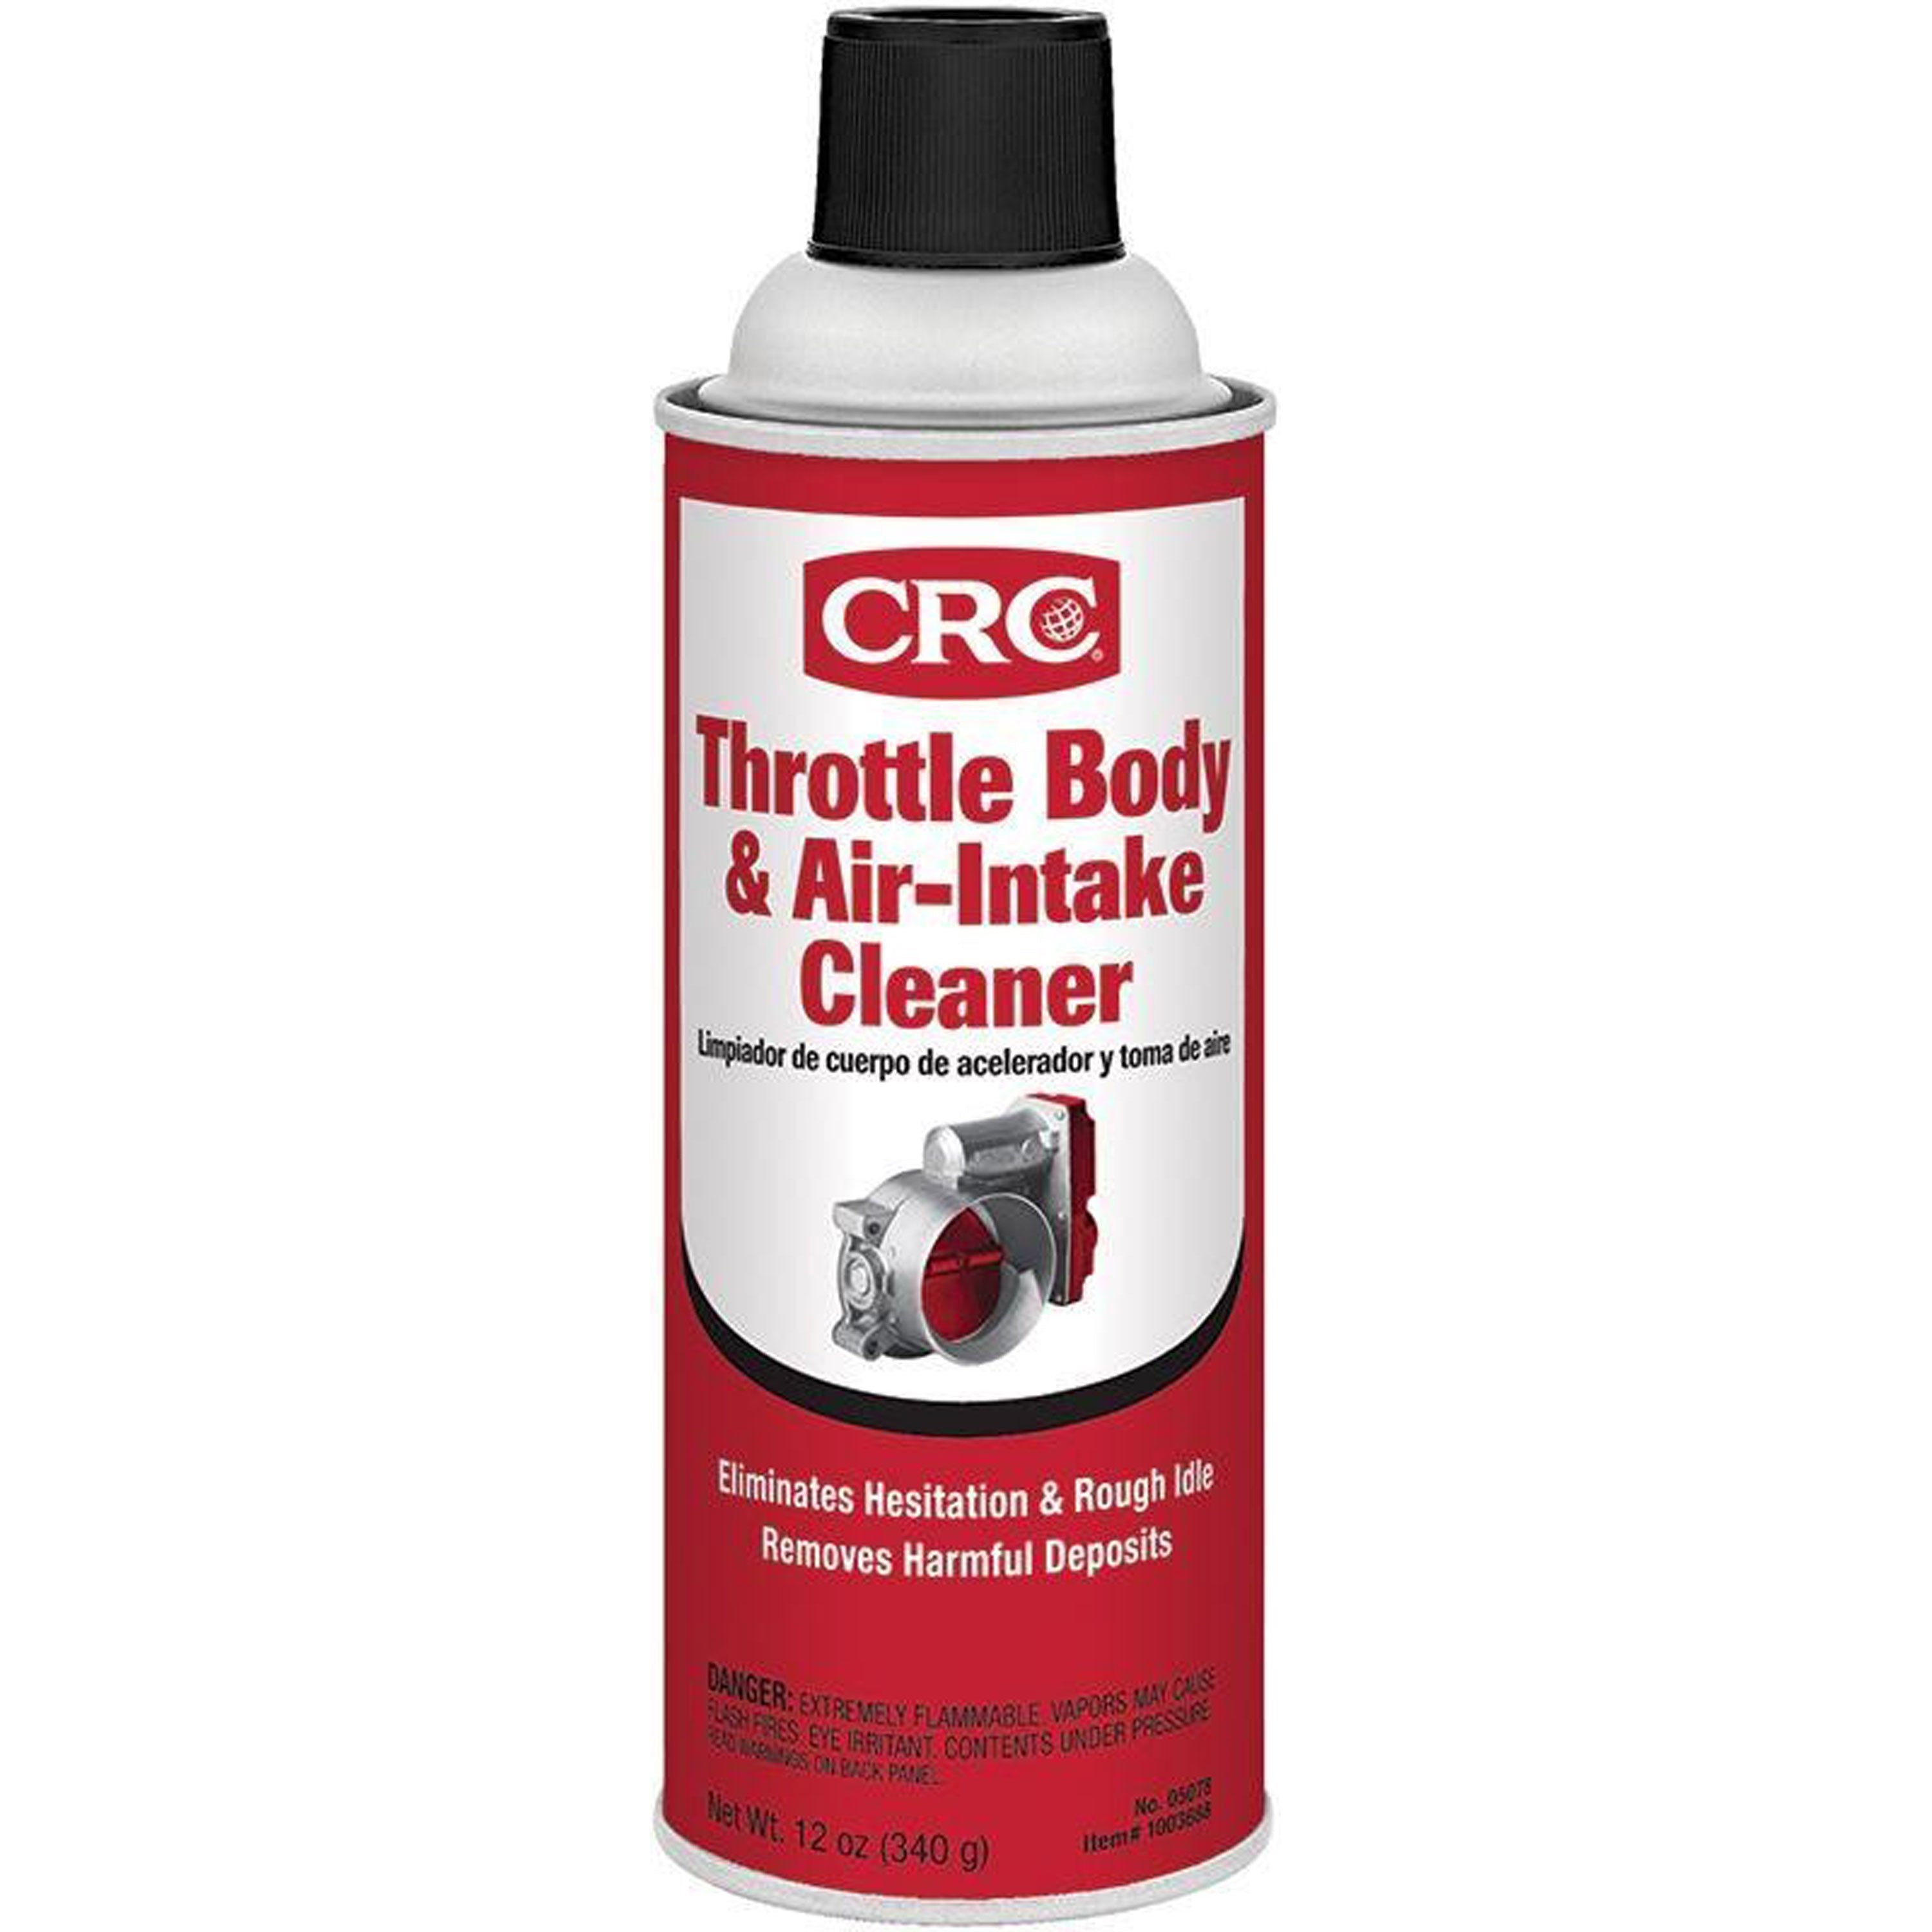 CRC 05078 Throttle Body and Air-Intake Cleaner - 12 oz.